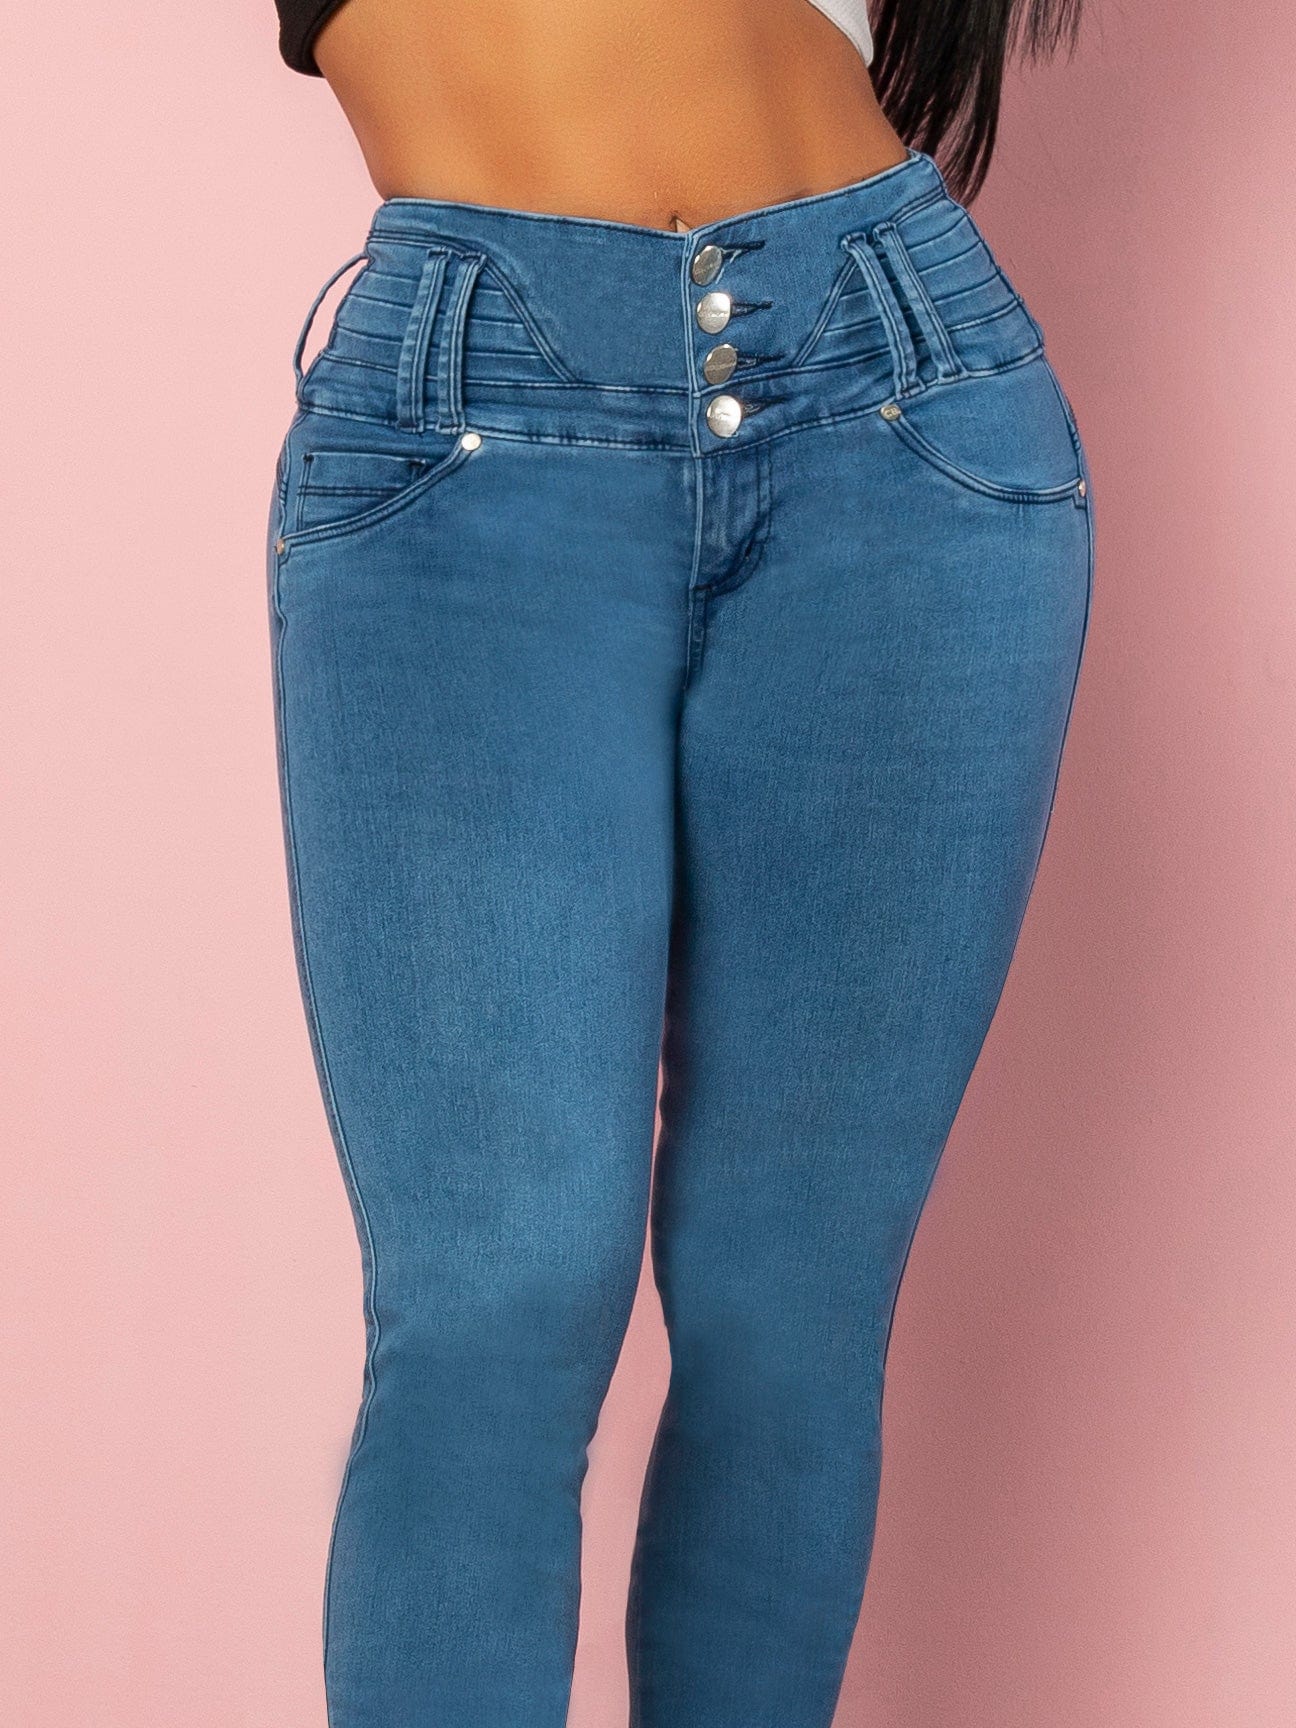 Close front view of Can Cun Butt Lift Skin Tight Jeans.